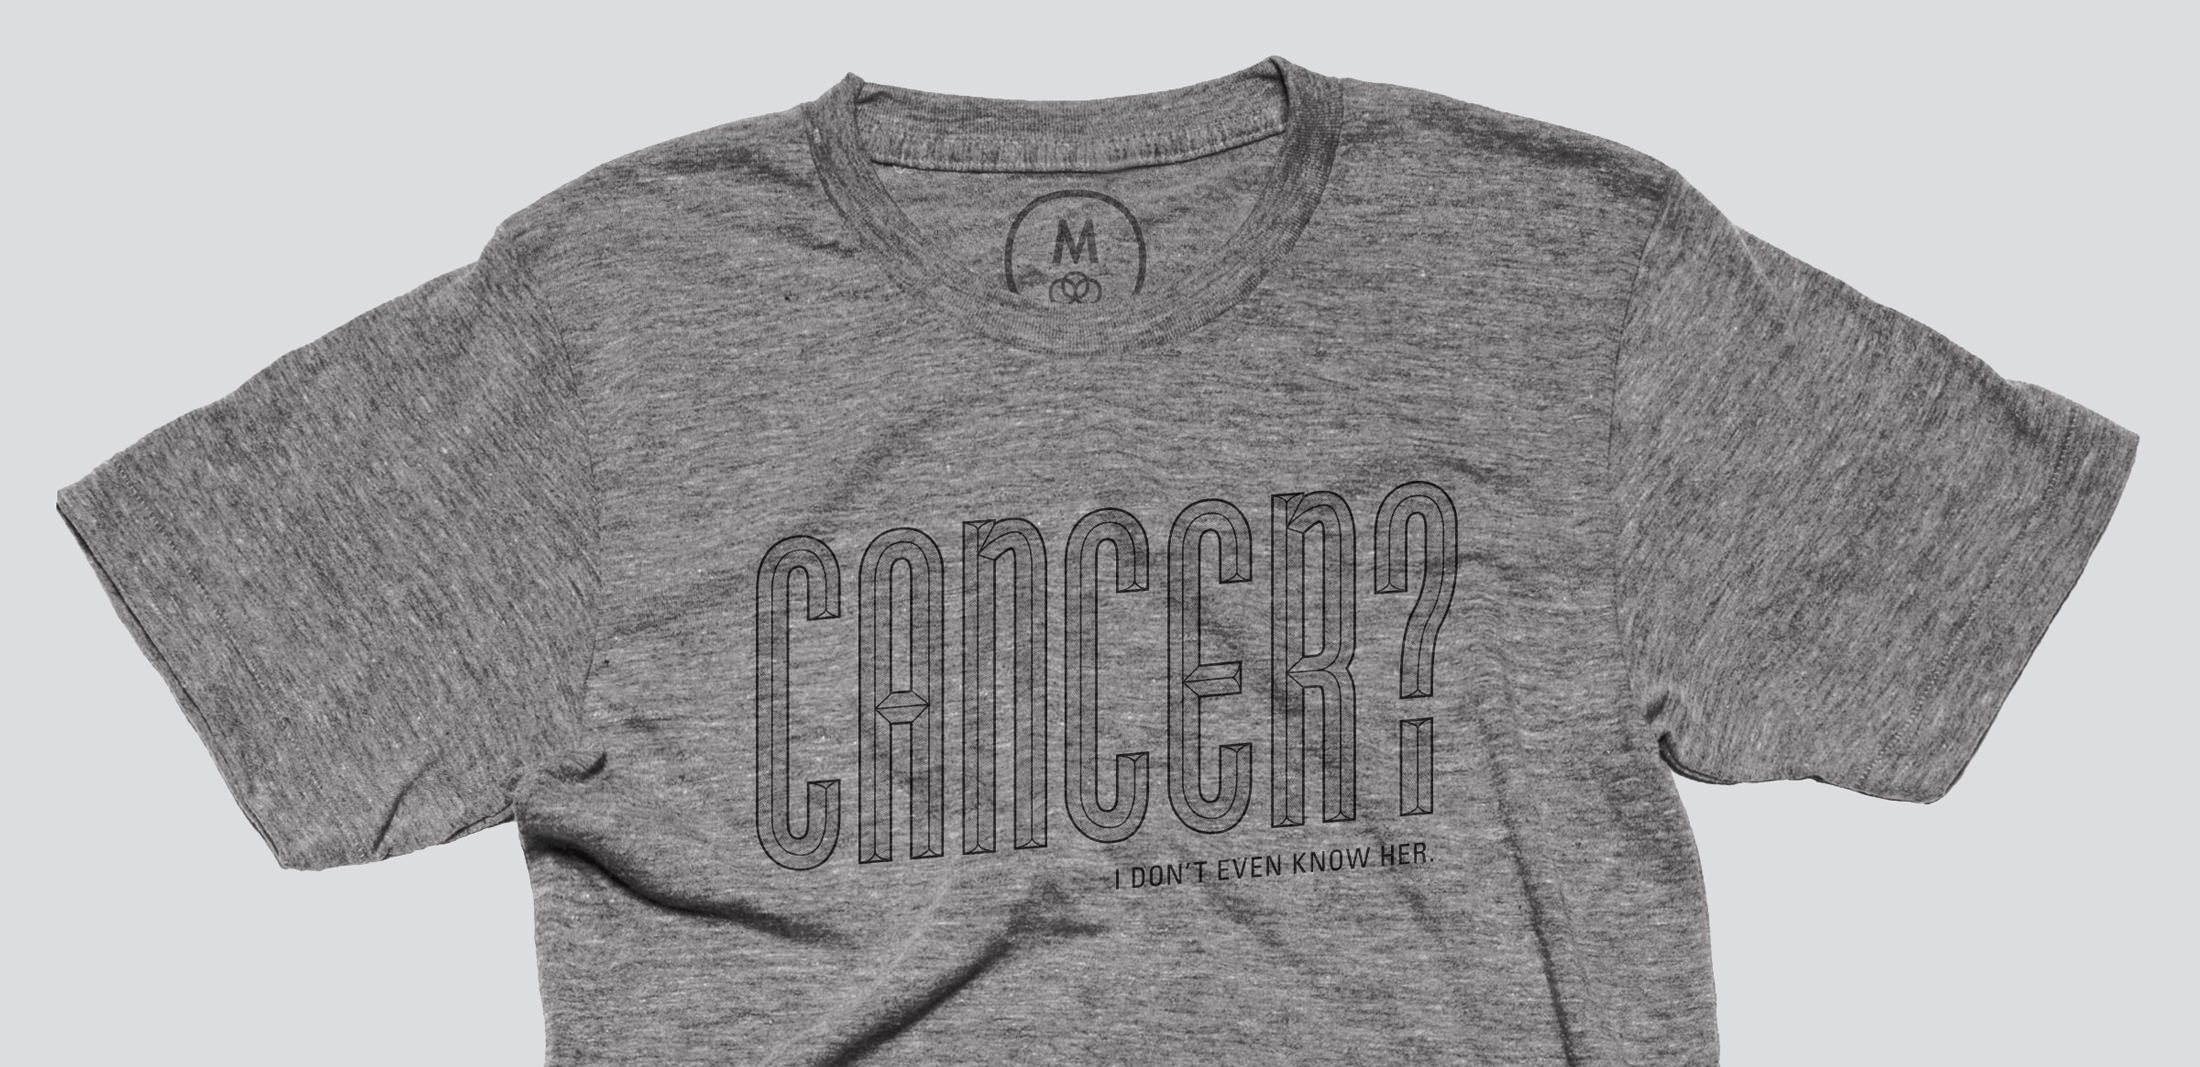 A Cancer? I don't even know her. t-shirt is available through Cotton Bureau.